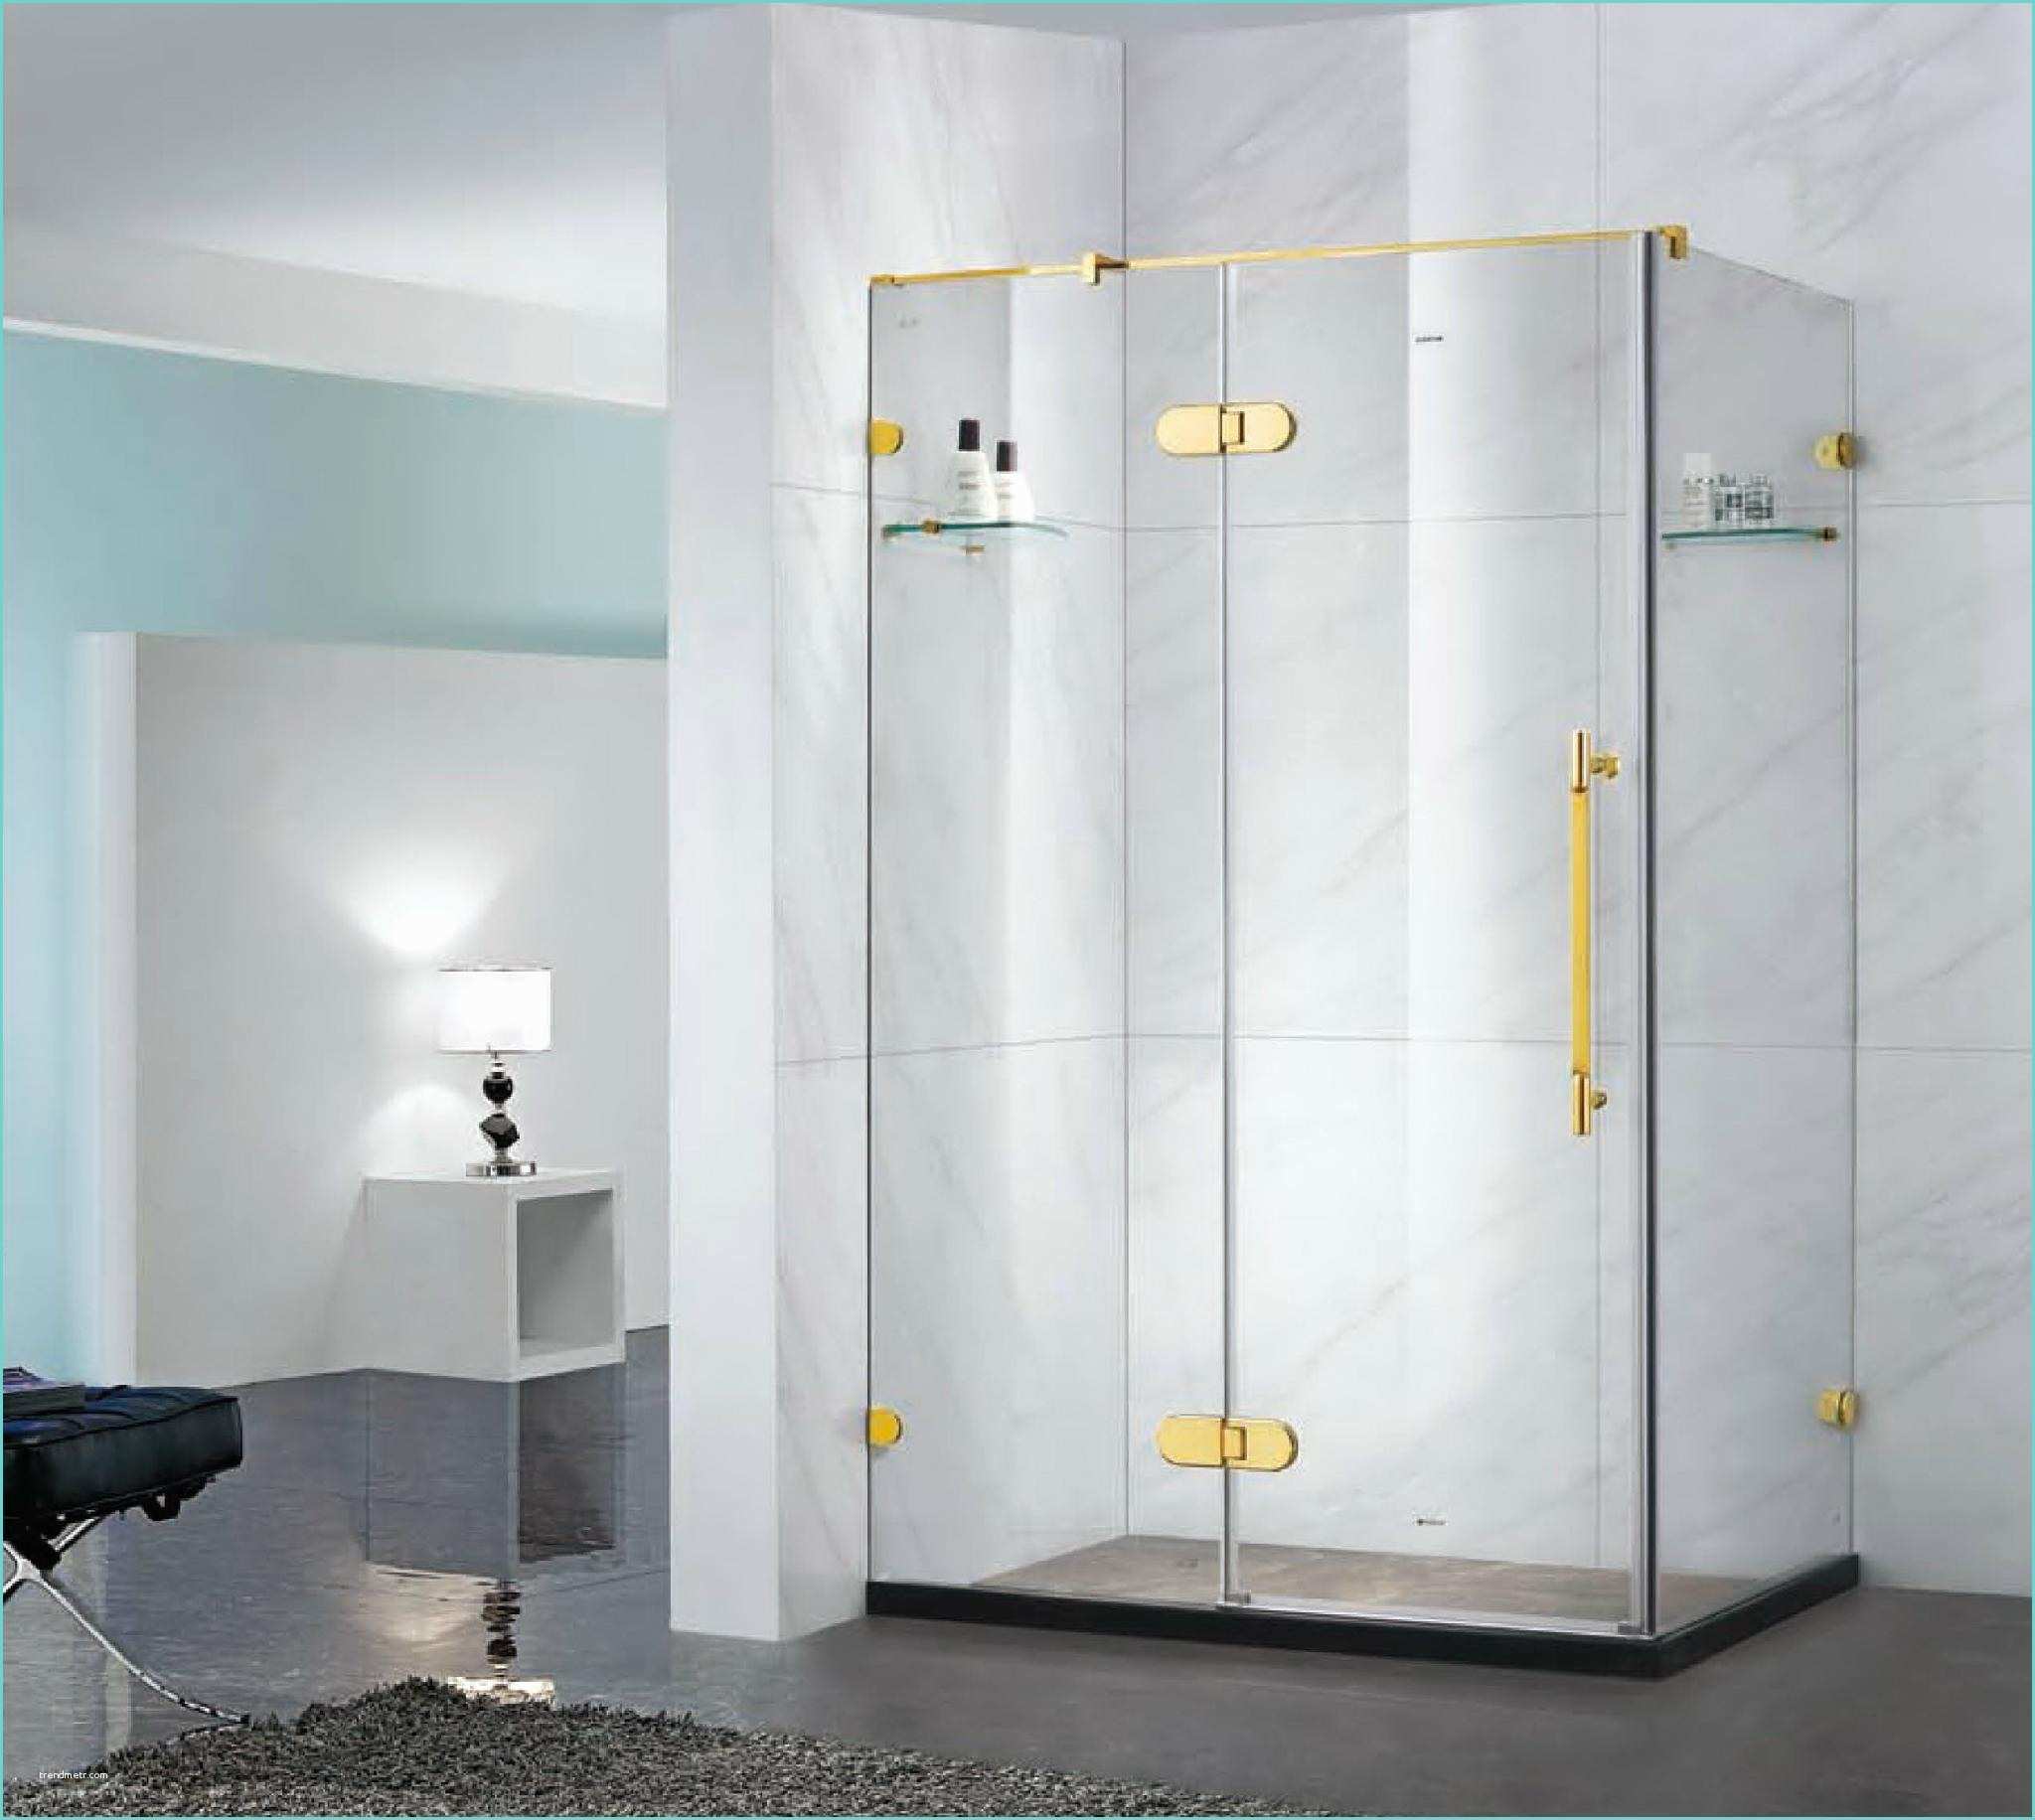 China Italian Shower Cabin Factory Handicapped Shower Room Ts 001 Temsung China